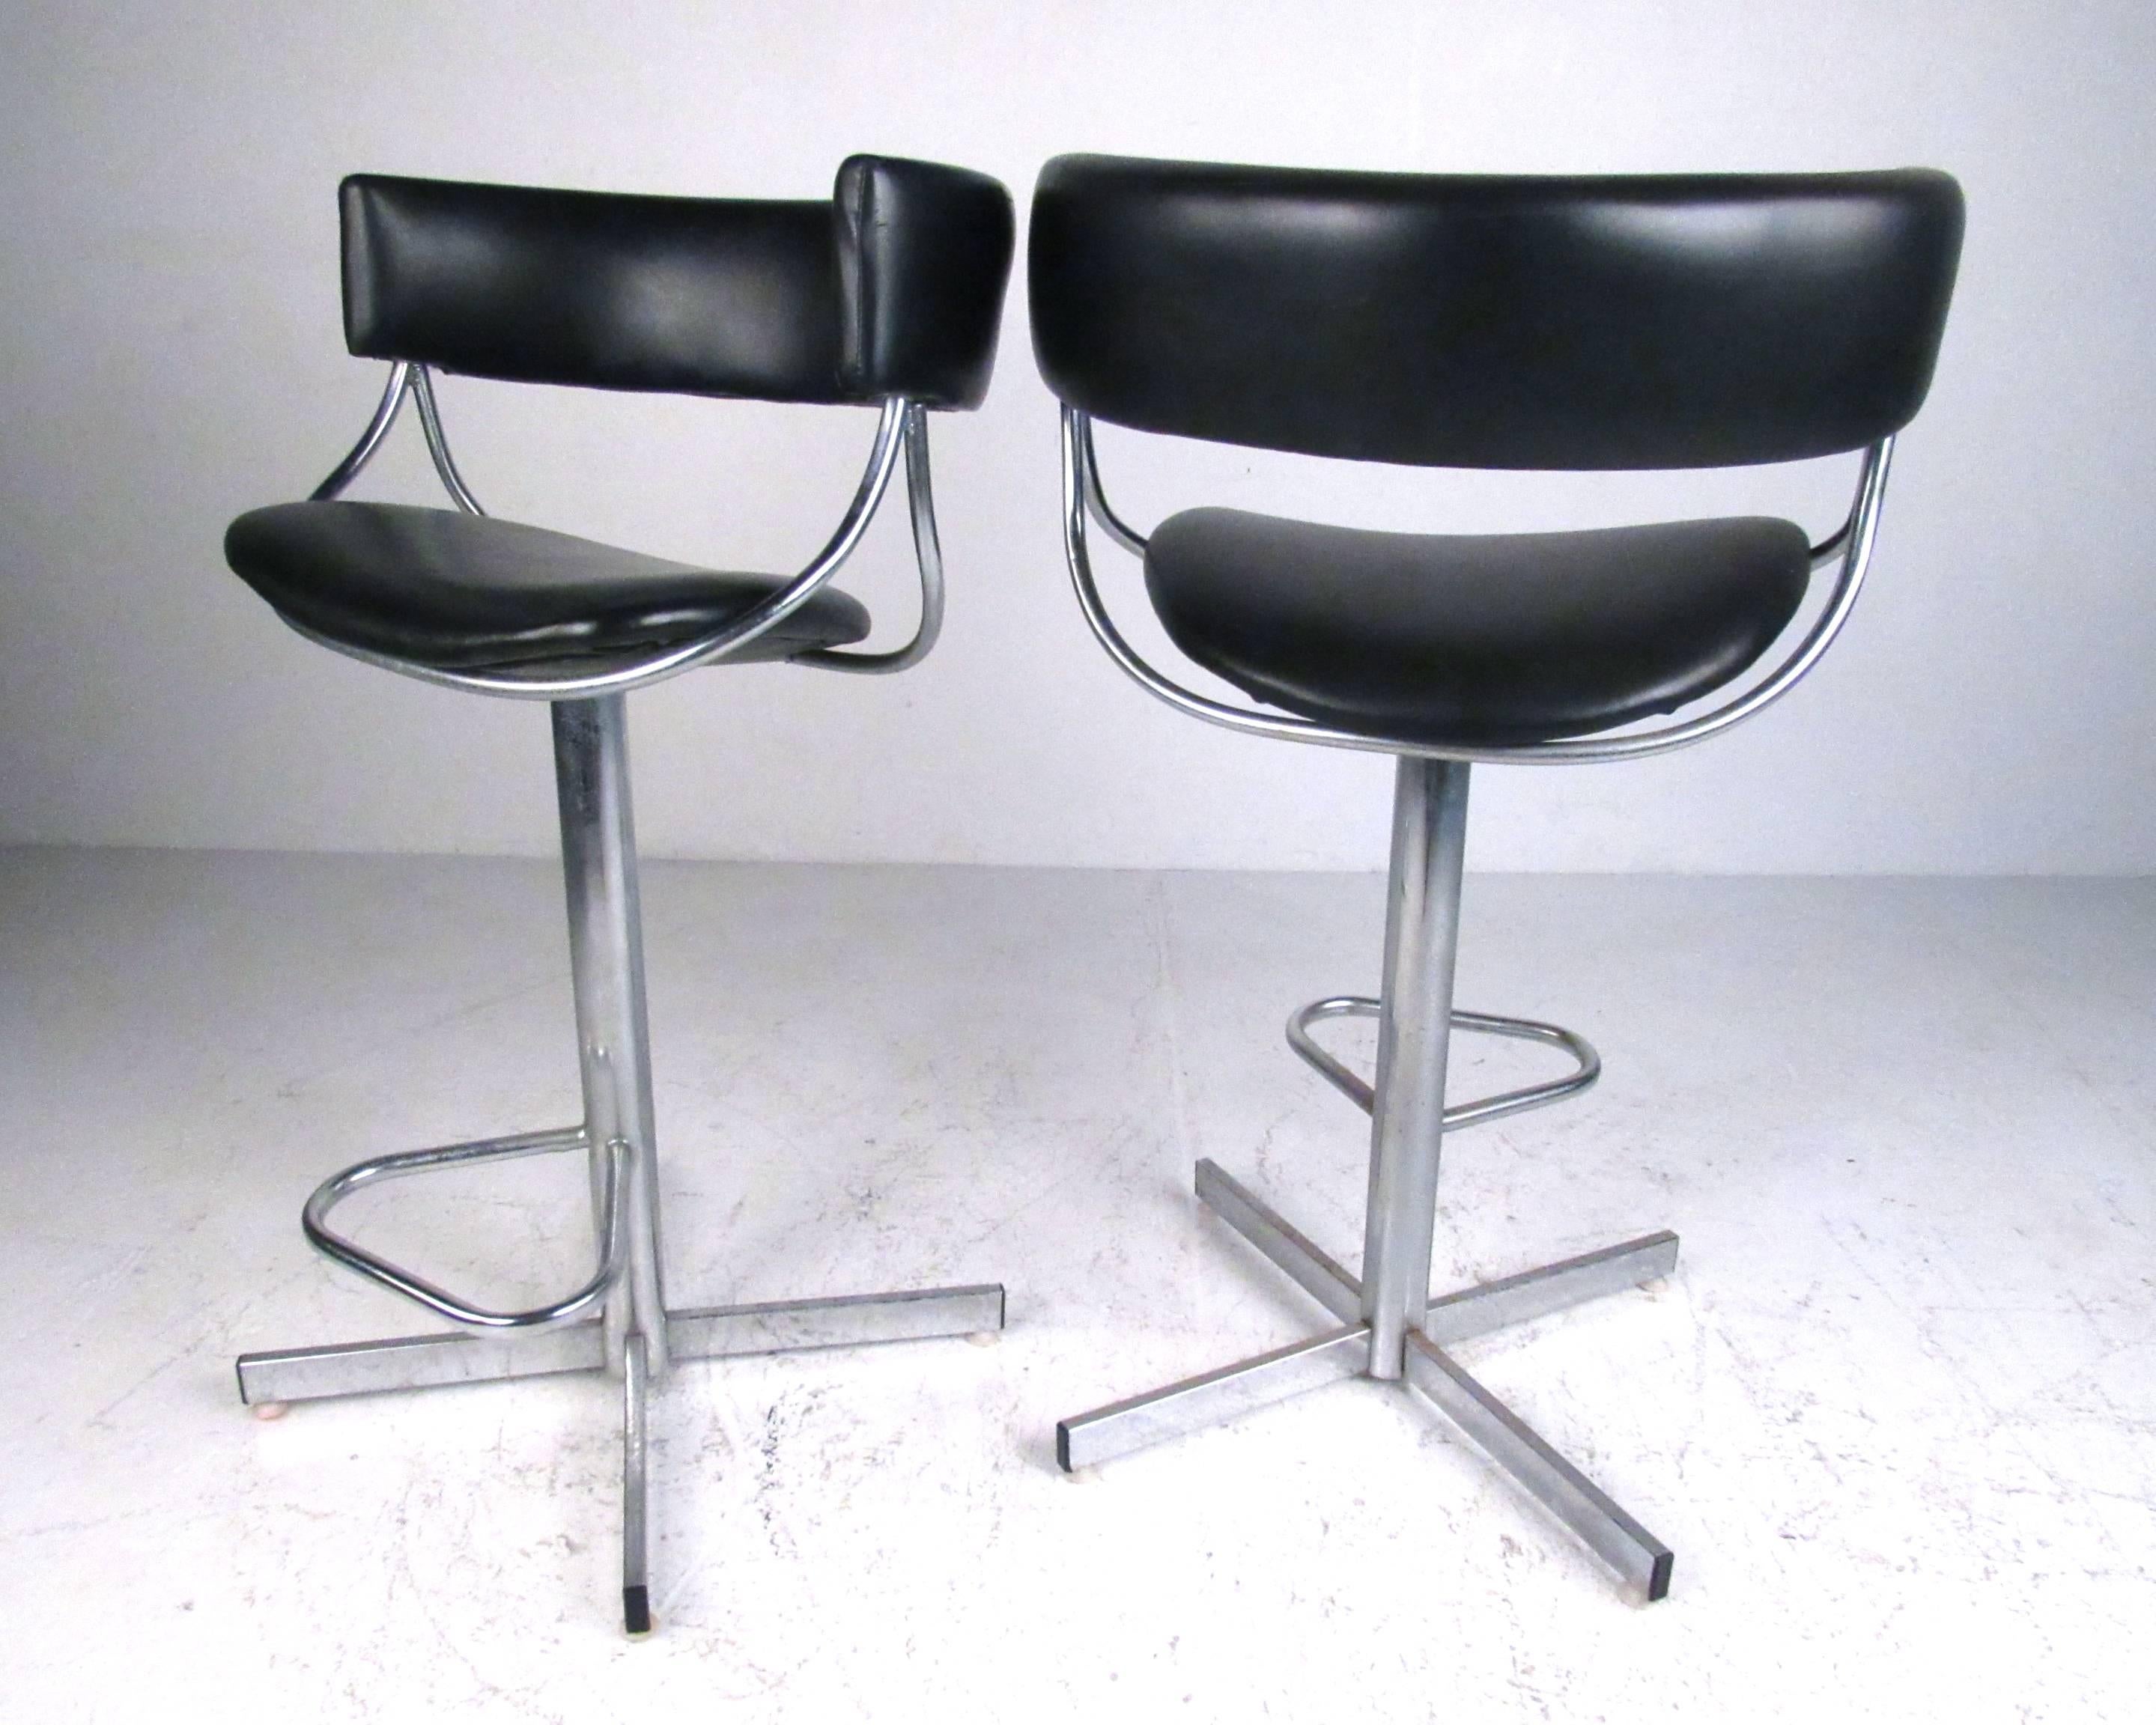 This set of four chrome swivel barstools feature unique Mid-Century design with stylish barrel seats. Metal footrests and sleek vintage modern style add to the comfort of this matching set of four American made stools by Jansko. Ideal for home or